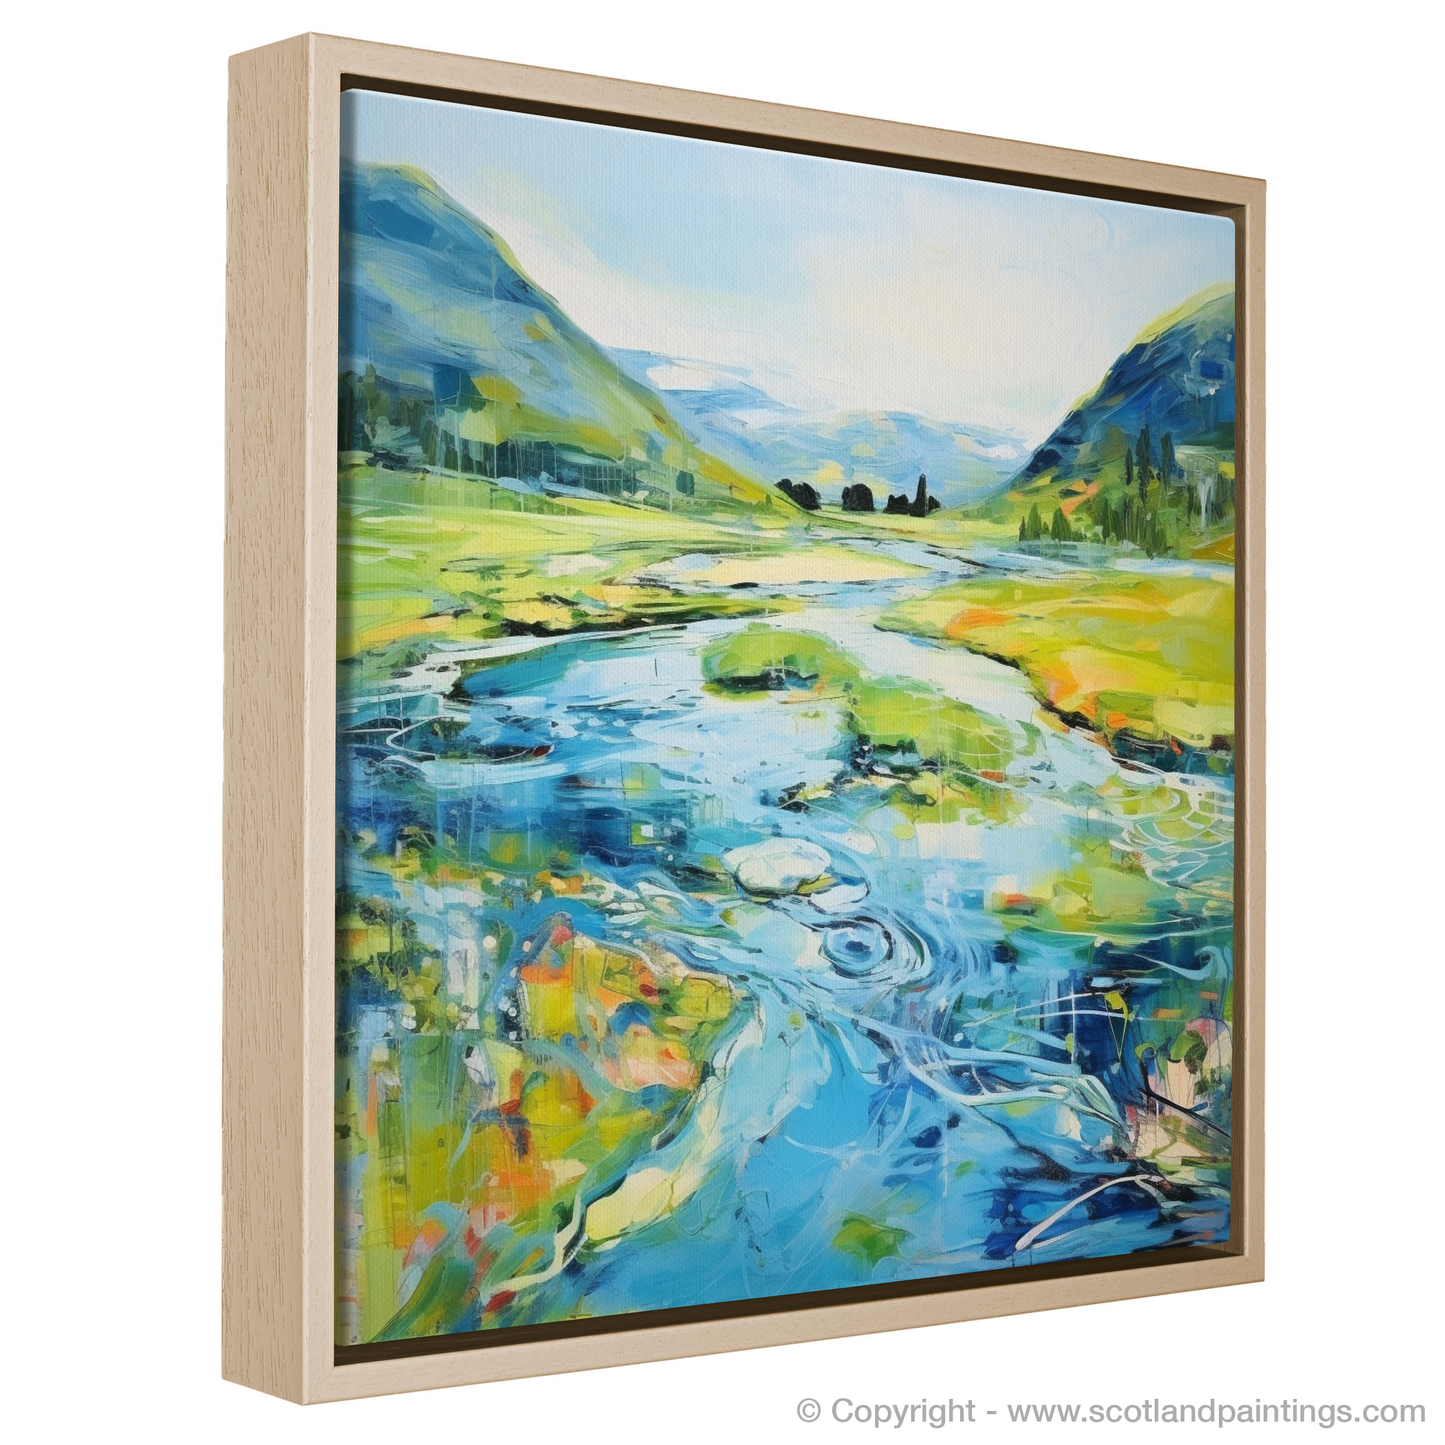 Painting and Art Print of River Orchy, Argyll and Bute in summer entitled "Summer Serenade on the River Orchy".